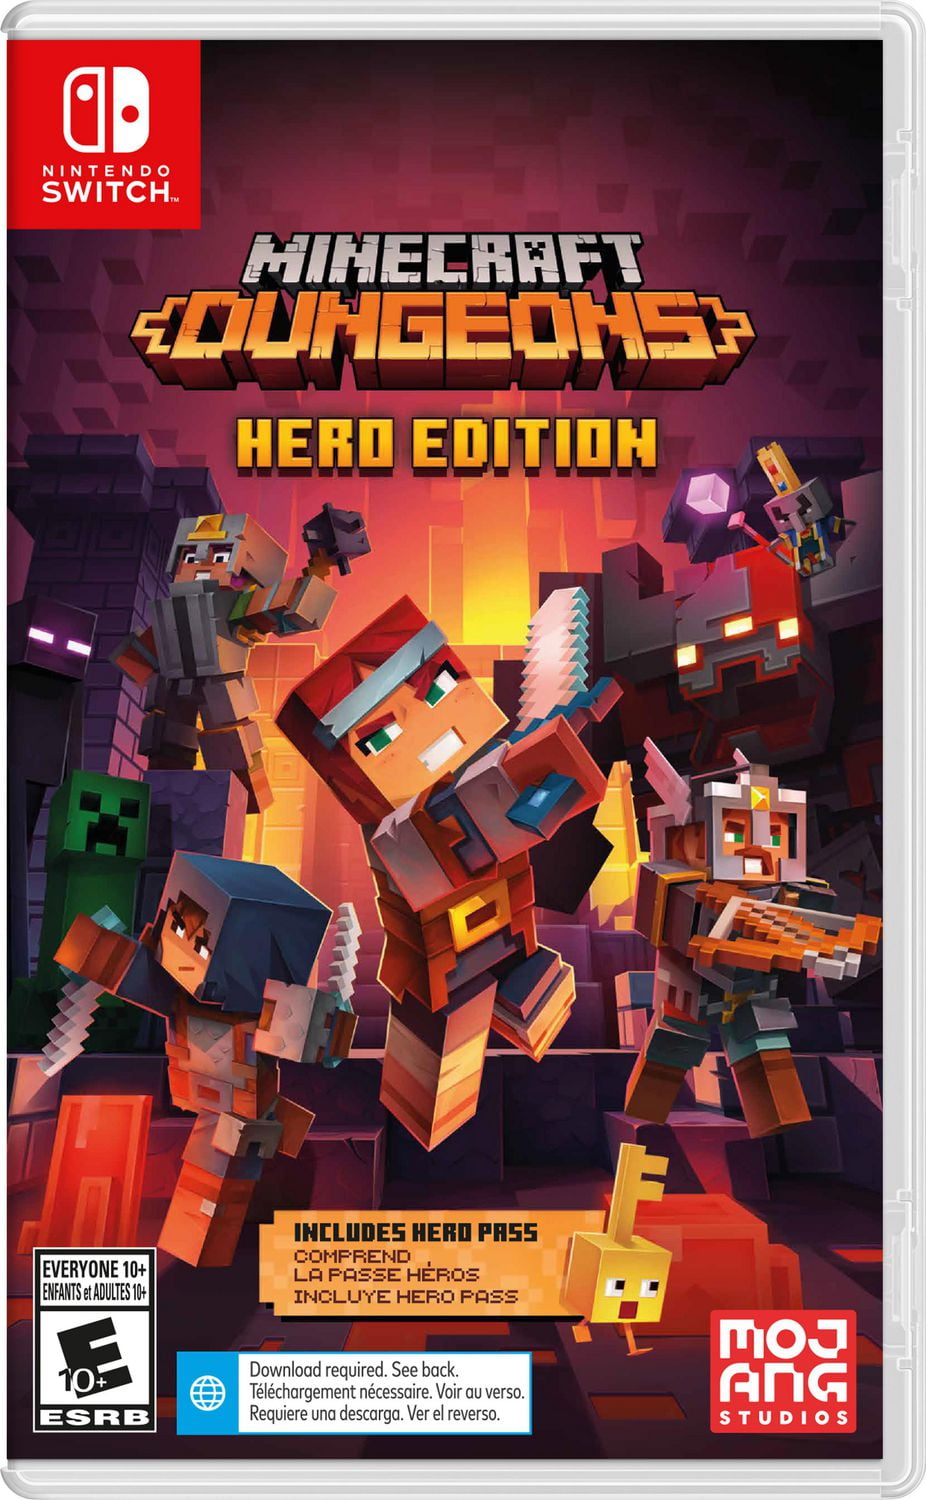 Best Buy: Minecraft Dungeons Ultimate Edition PlayStation 4